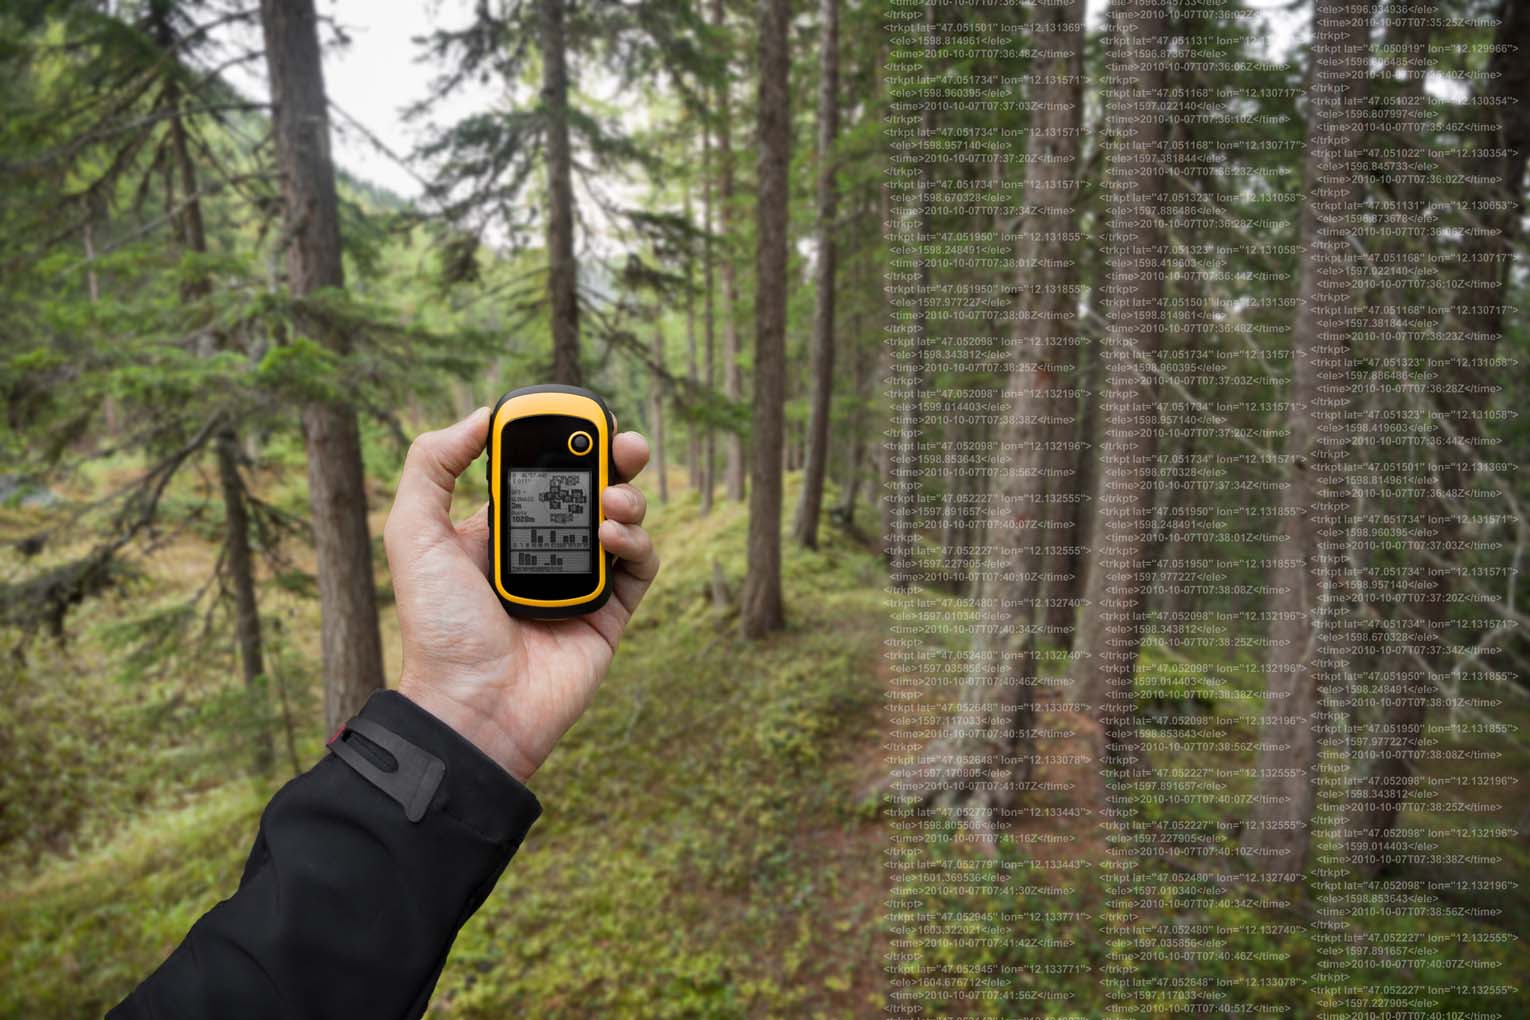 AHRNTAL, ITALY - SEPTEMBER 22, 2014: A trekker is finding the right position in the forest via gps in a cloudy autumnal day